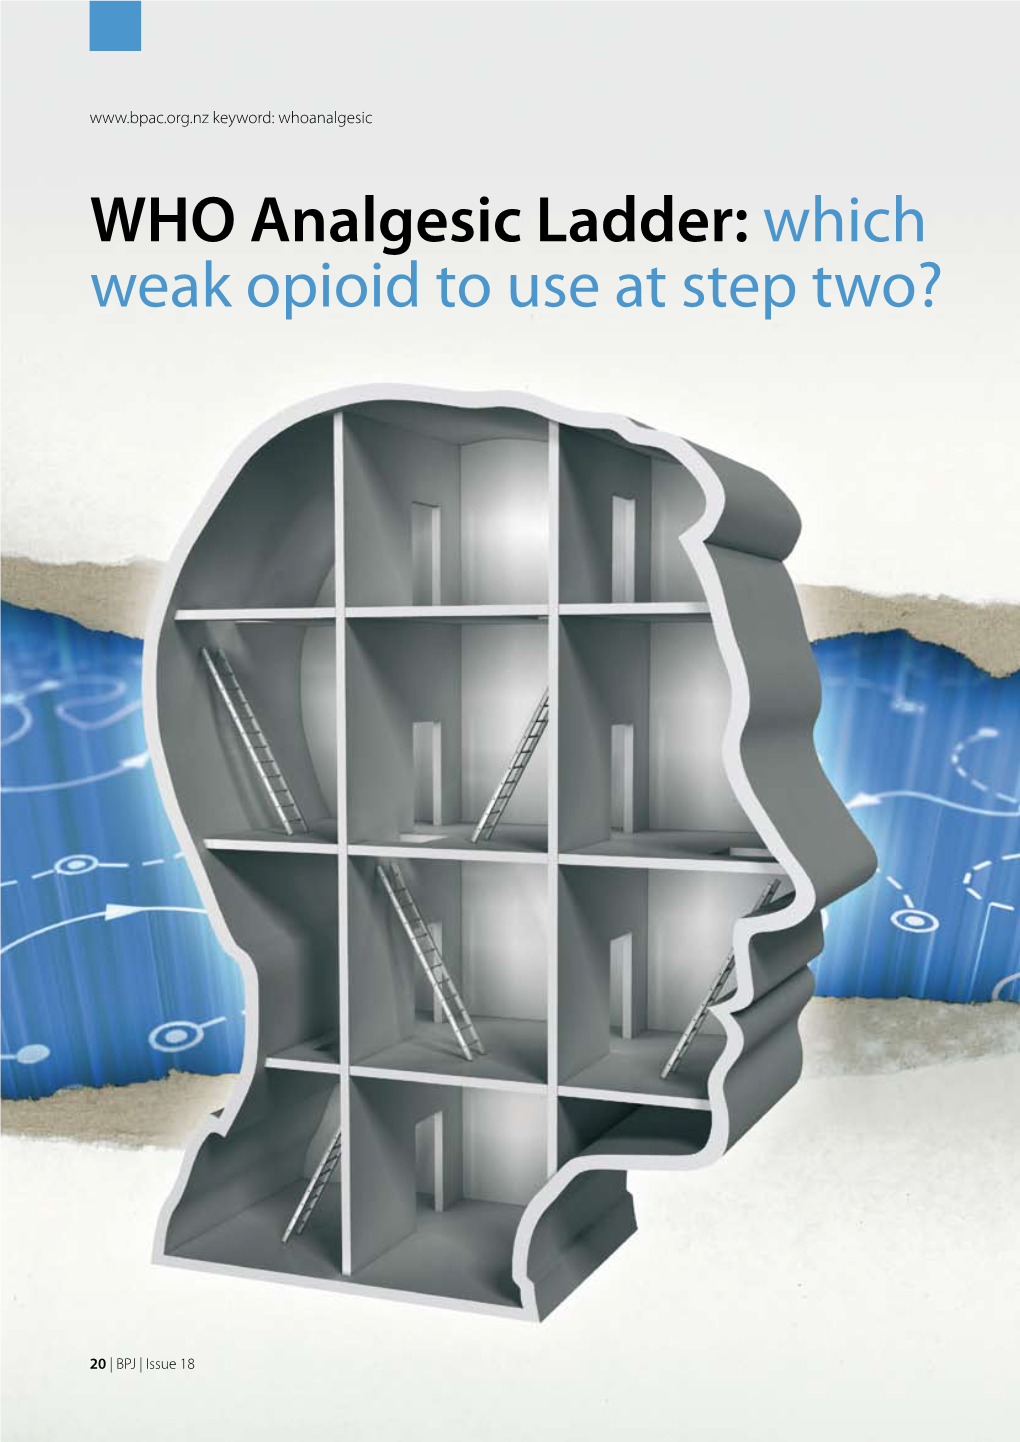 WHO Analgesic Ladder: Which Weak Opioid to Use at Step Two?